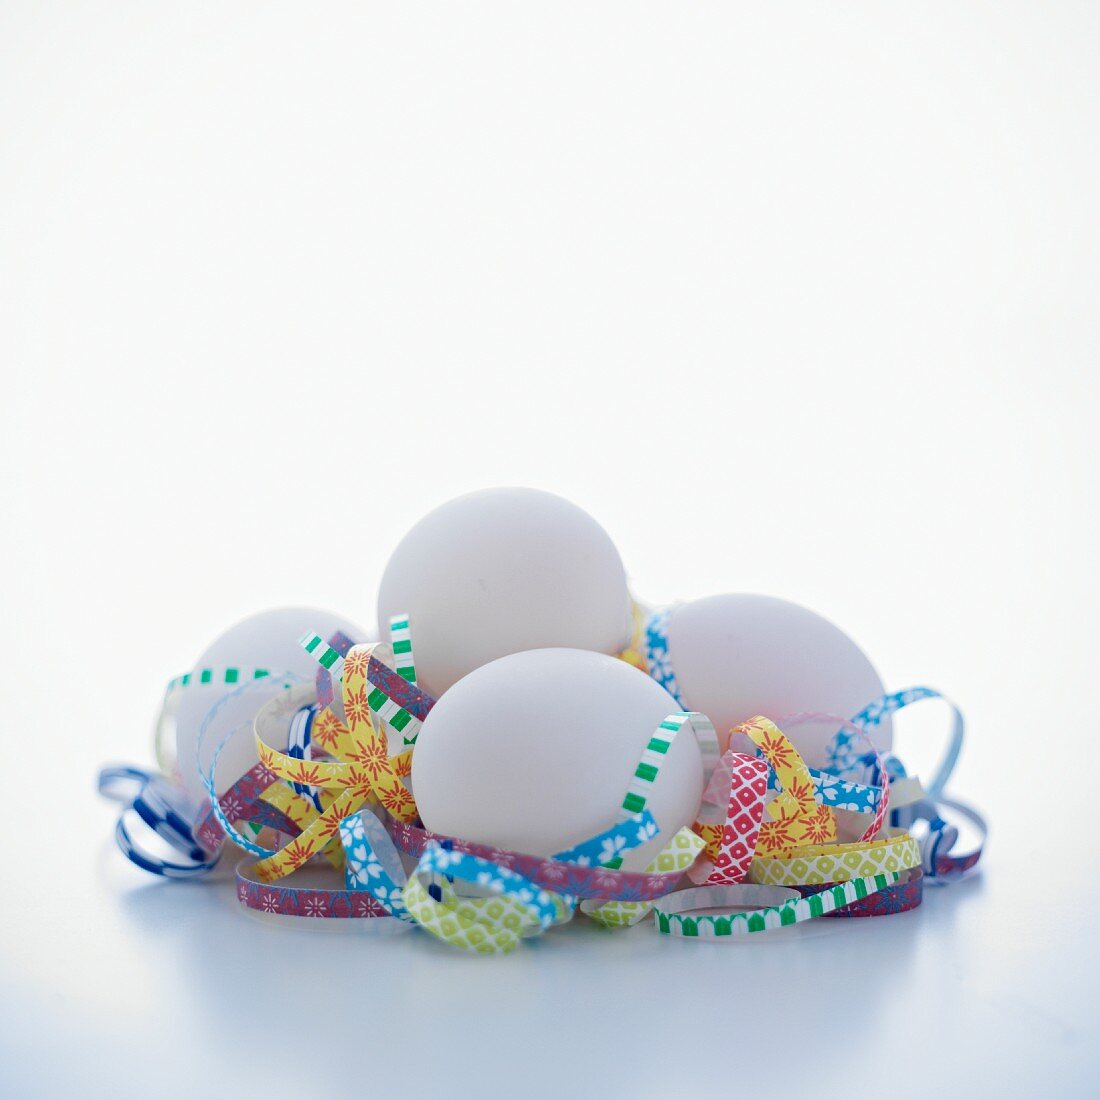 Group of white eggs with curls of shredded paper on a white background